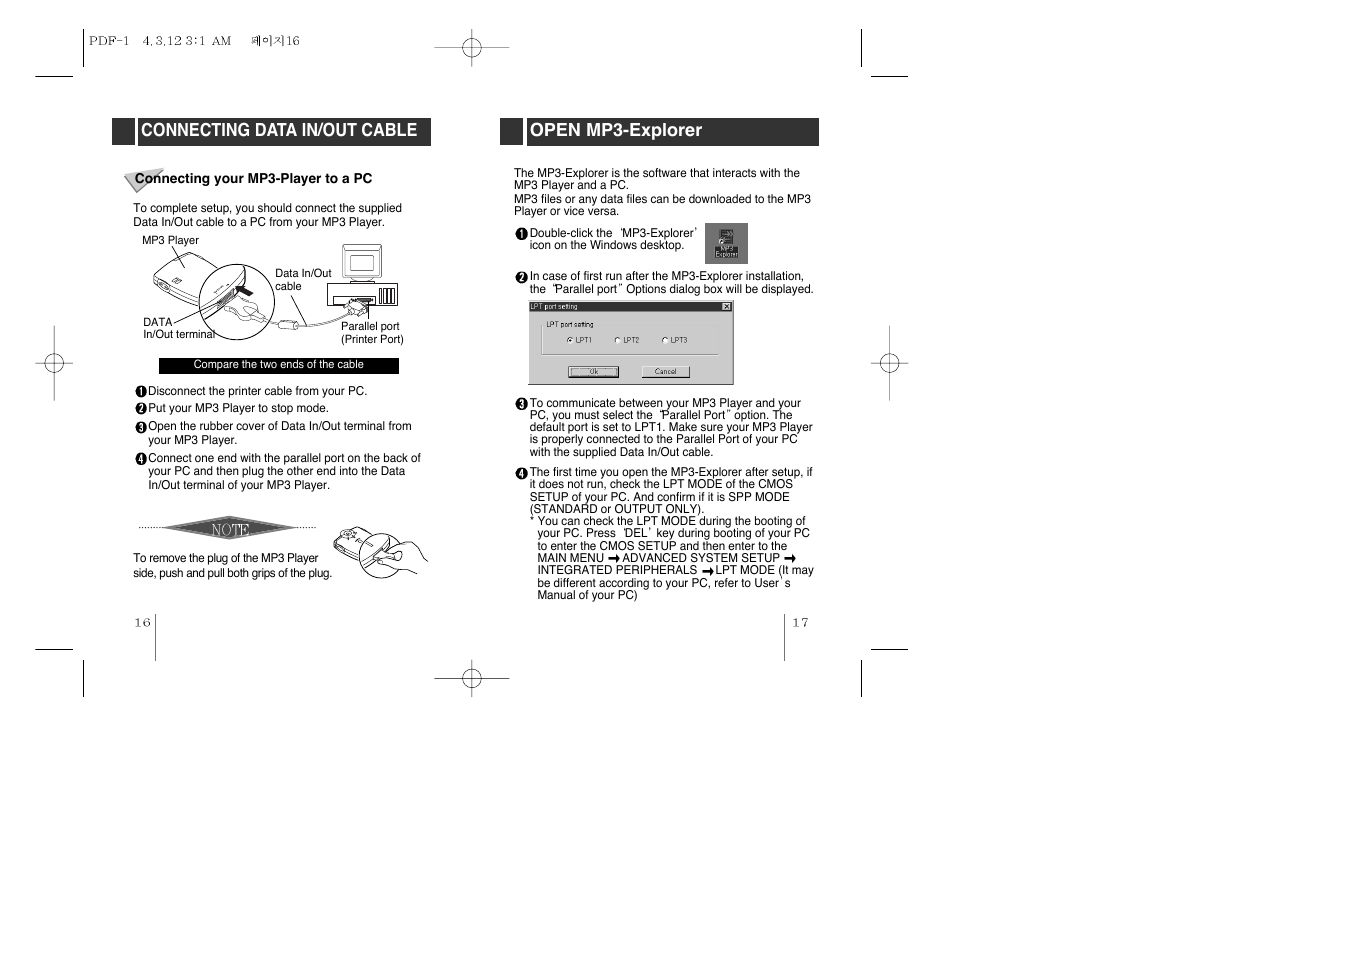 Connecting data in/out cable, Open mp3-explorer | LG MF-PD330 User Manual | Page 9 / 20